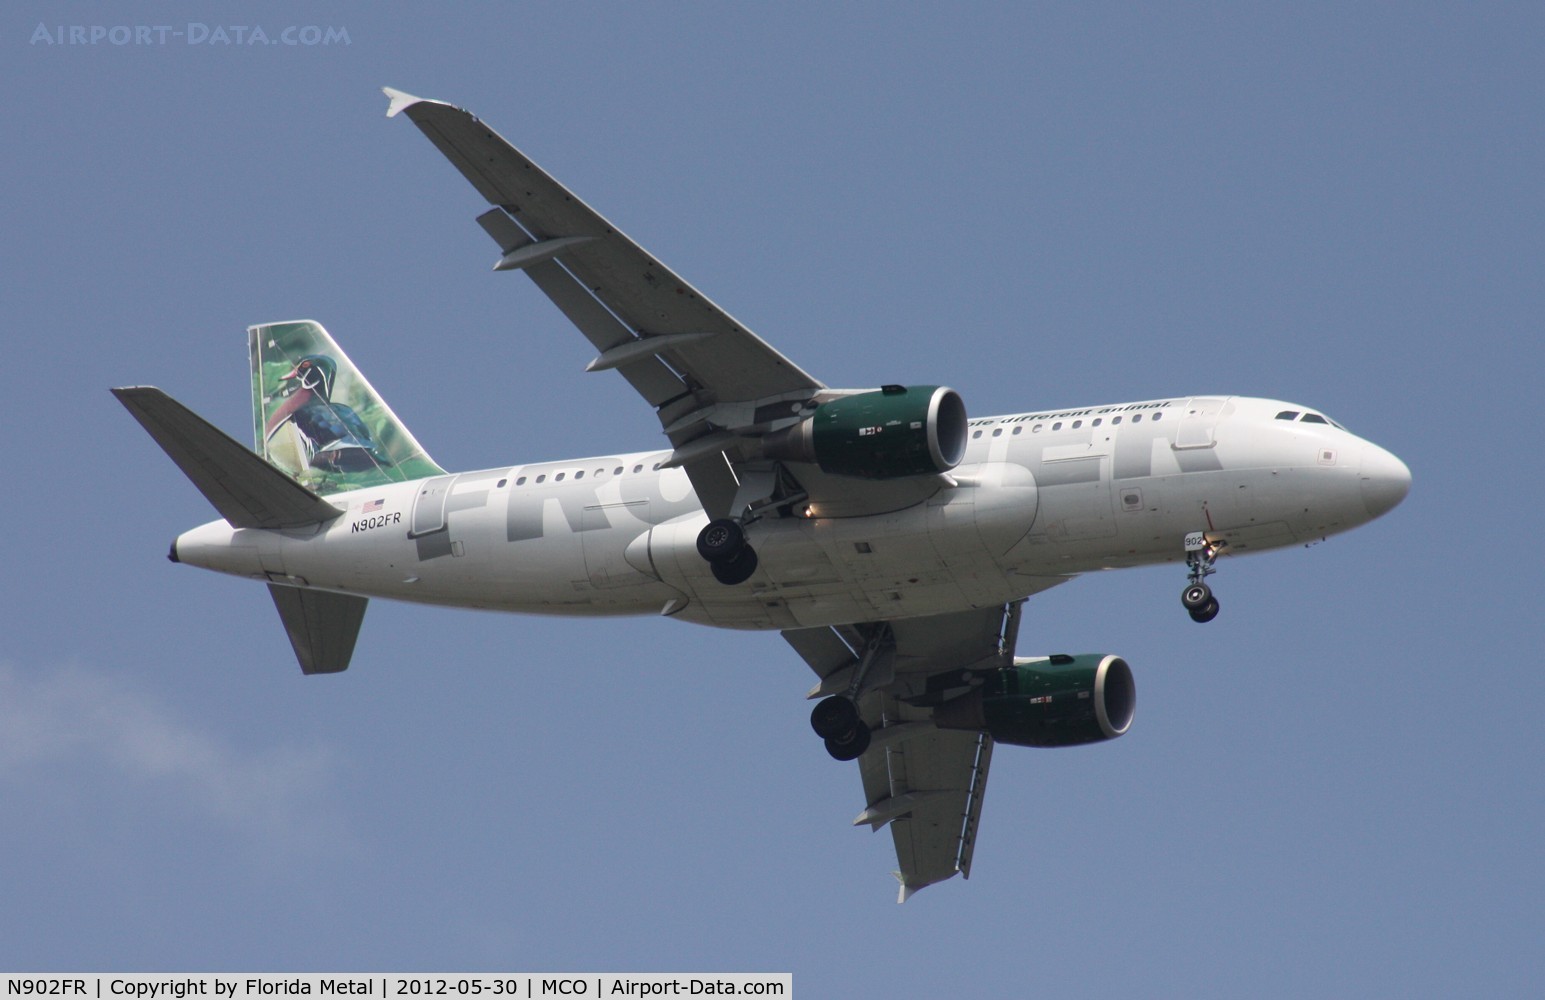 N902FR, 2001 Airbus A319-111 C/N 1515, Woody the Wood Duck Frontier A319